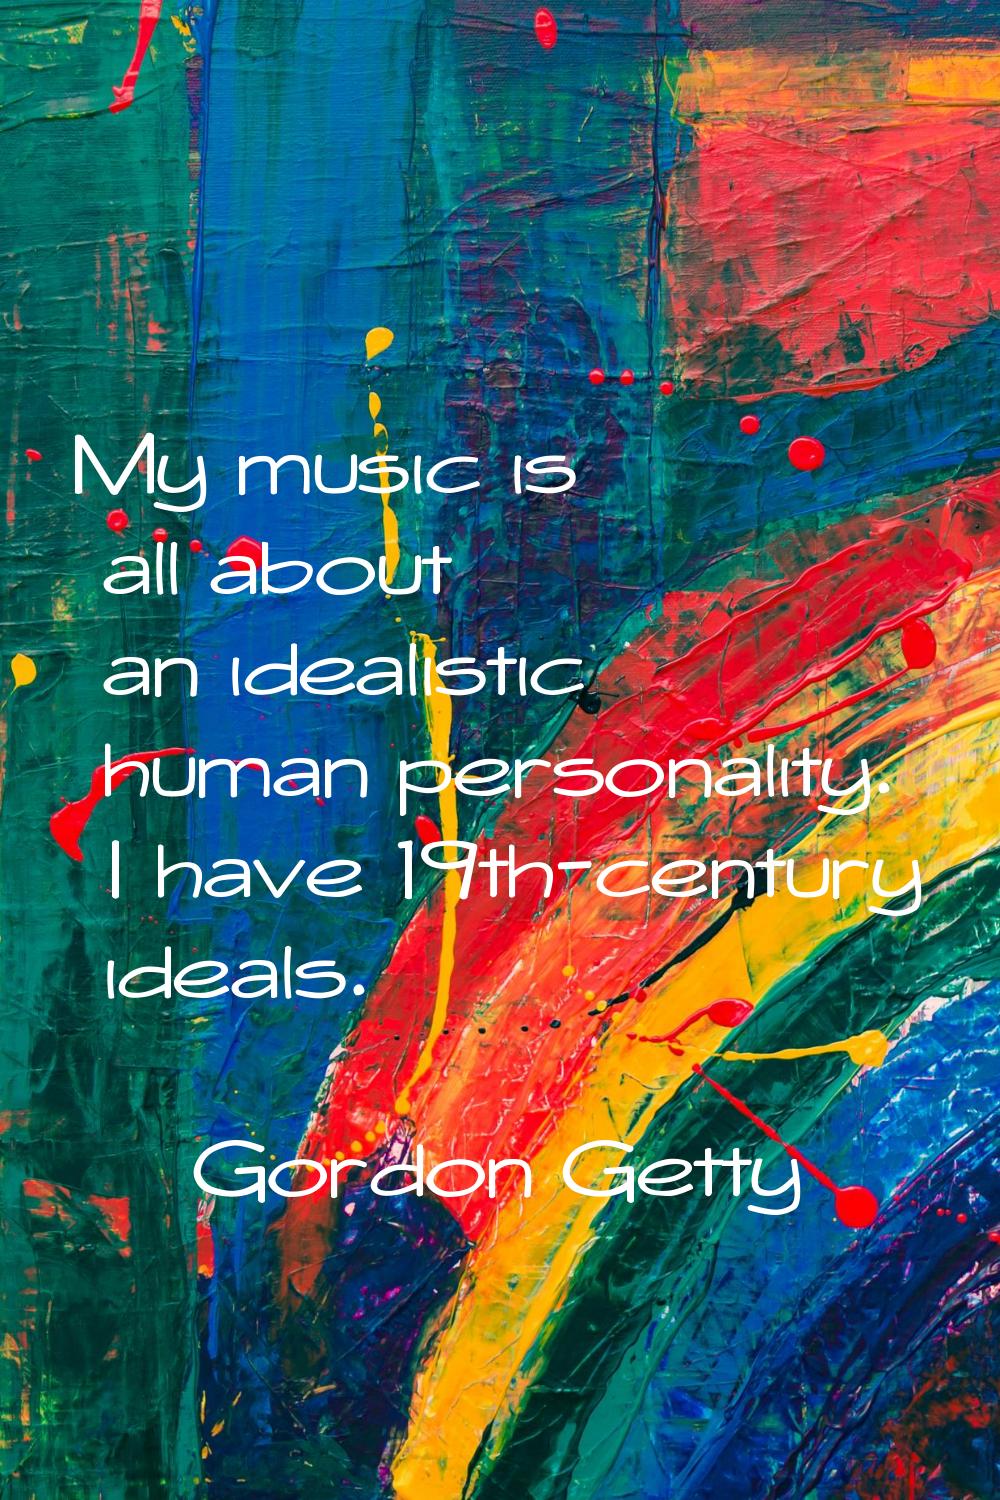 My music is all about an idealistic human personality. I have 19th-century ideals.